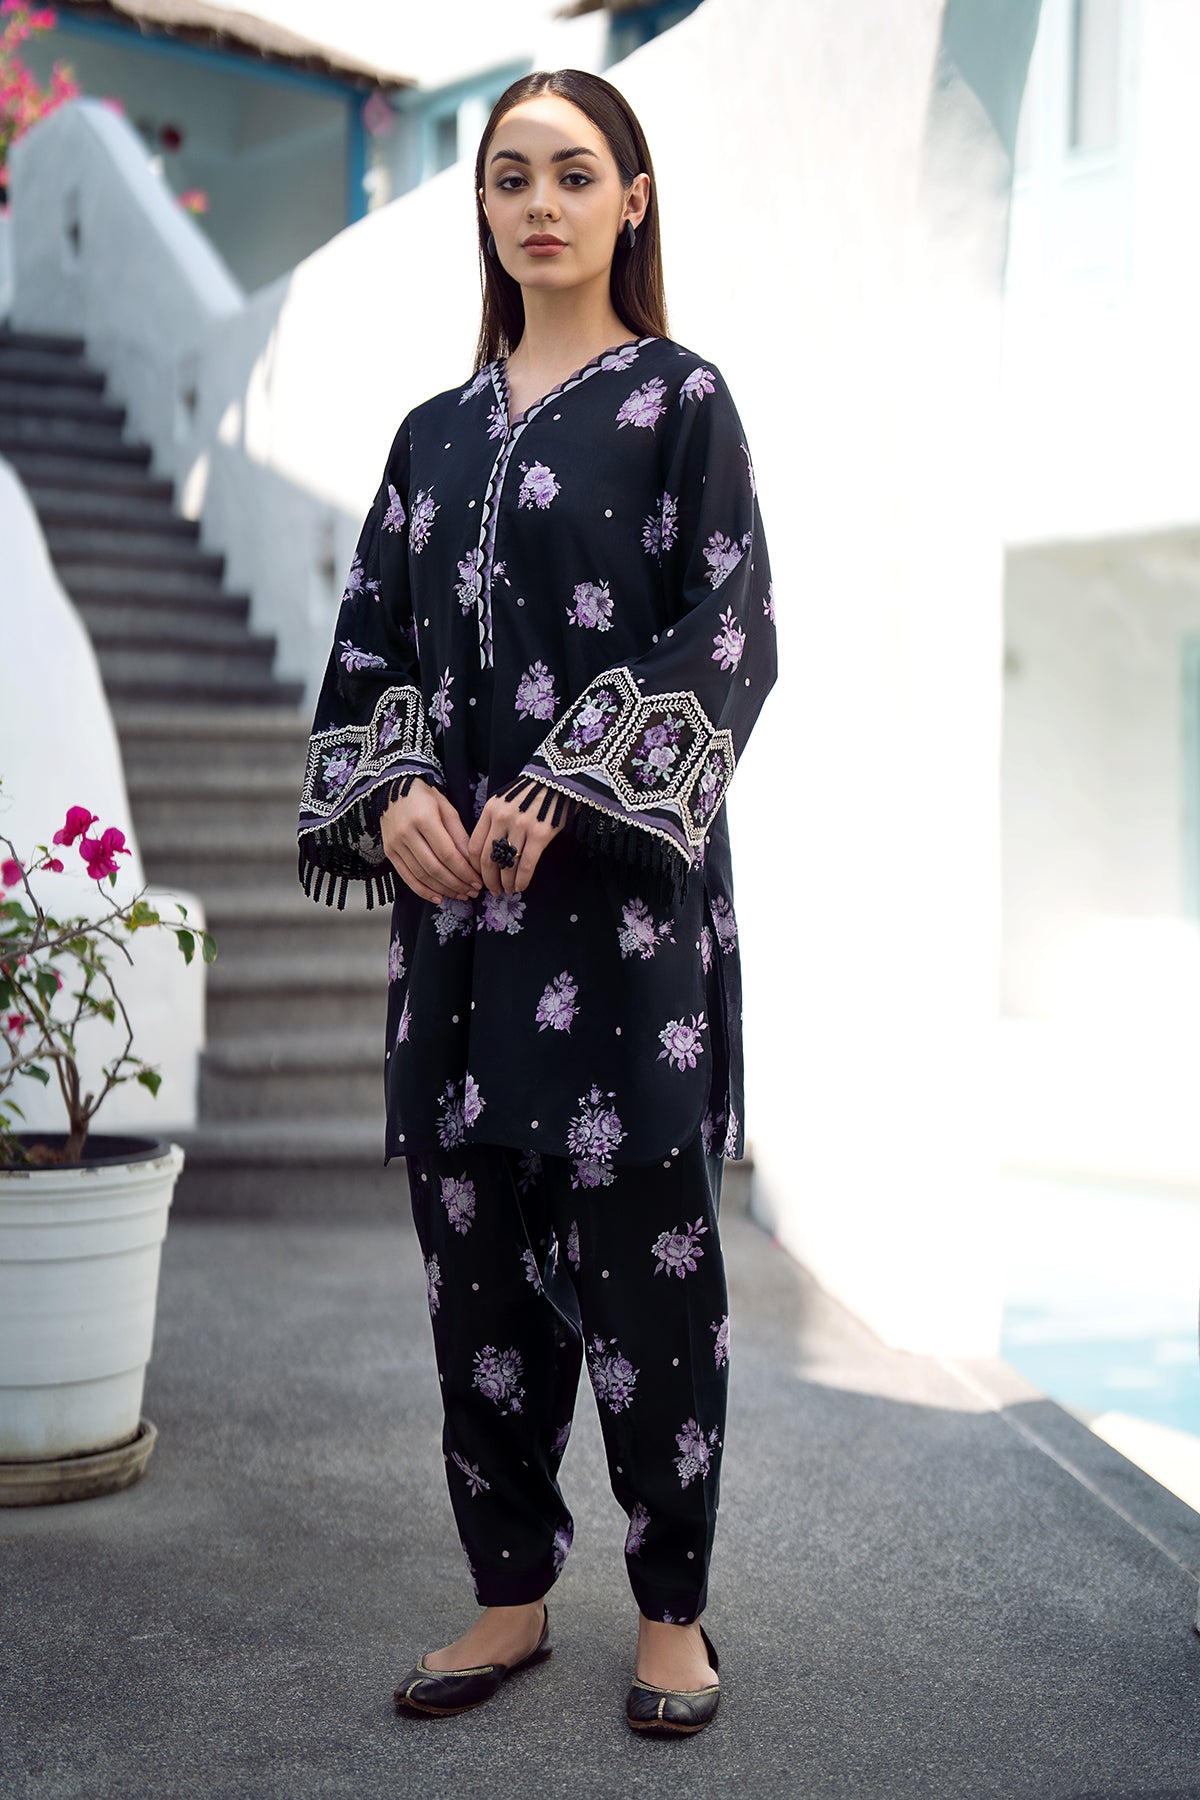 EMBROIDERED PRINTED LAWN UF-543